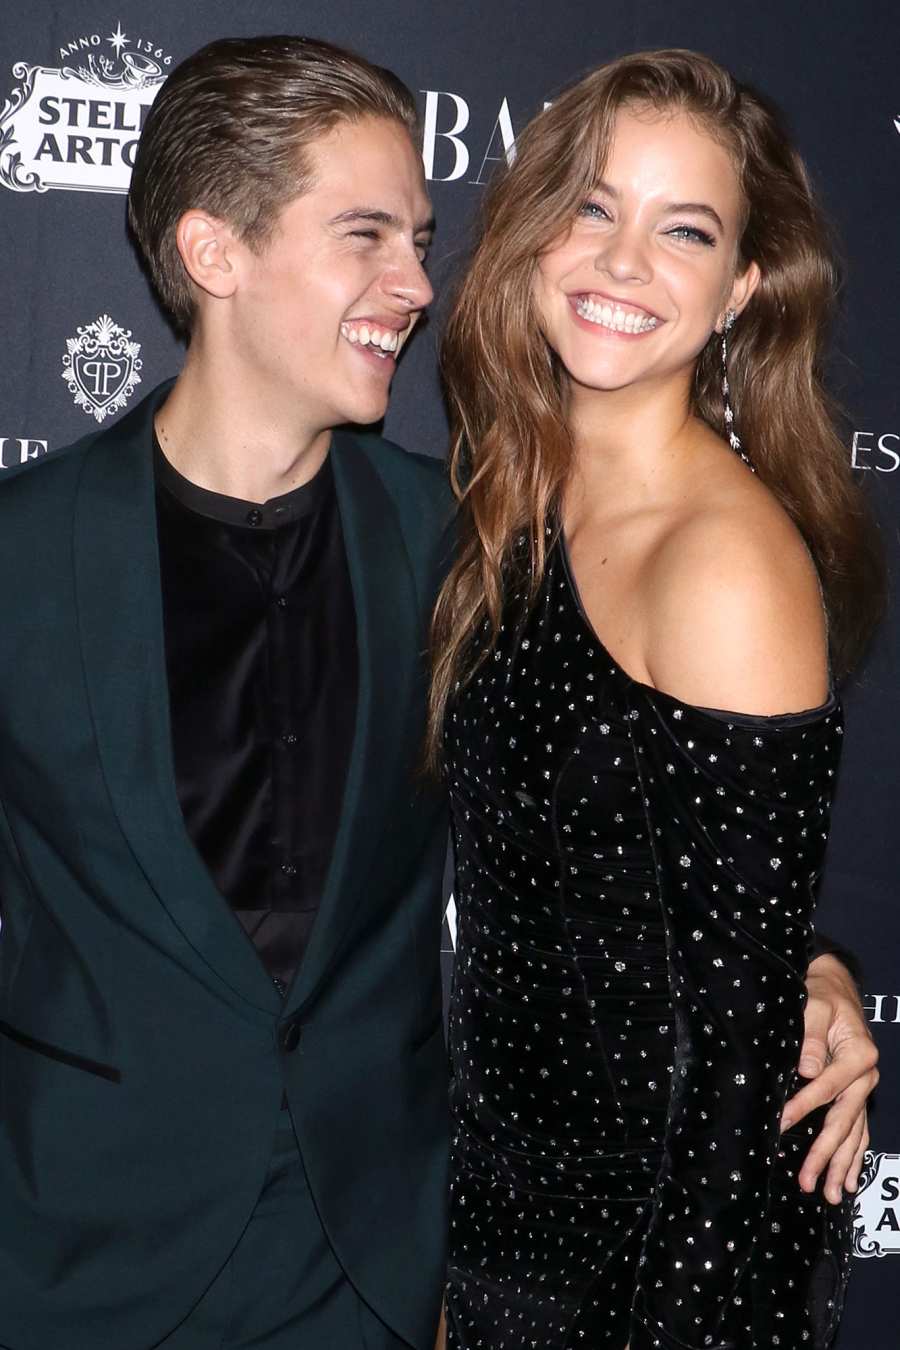 August 2017 Dylan Sprouse and Barbara Palvin Relationship Timeline